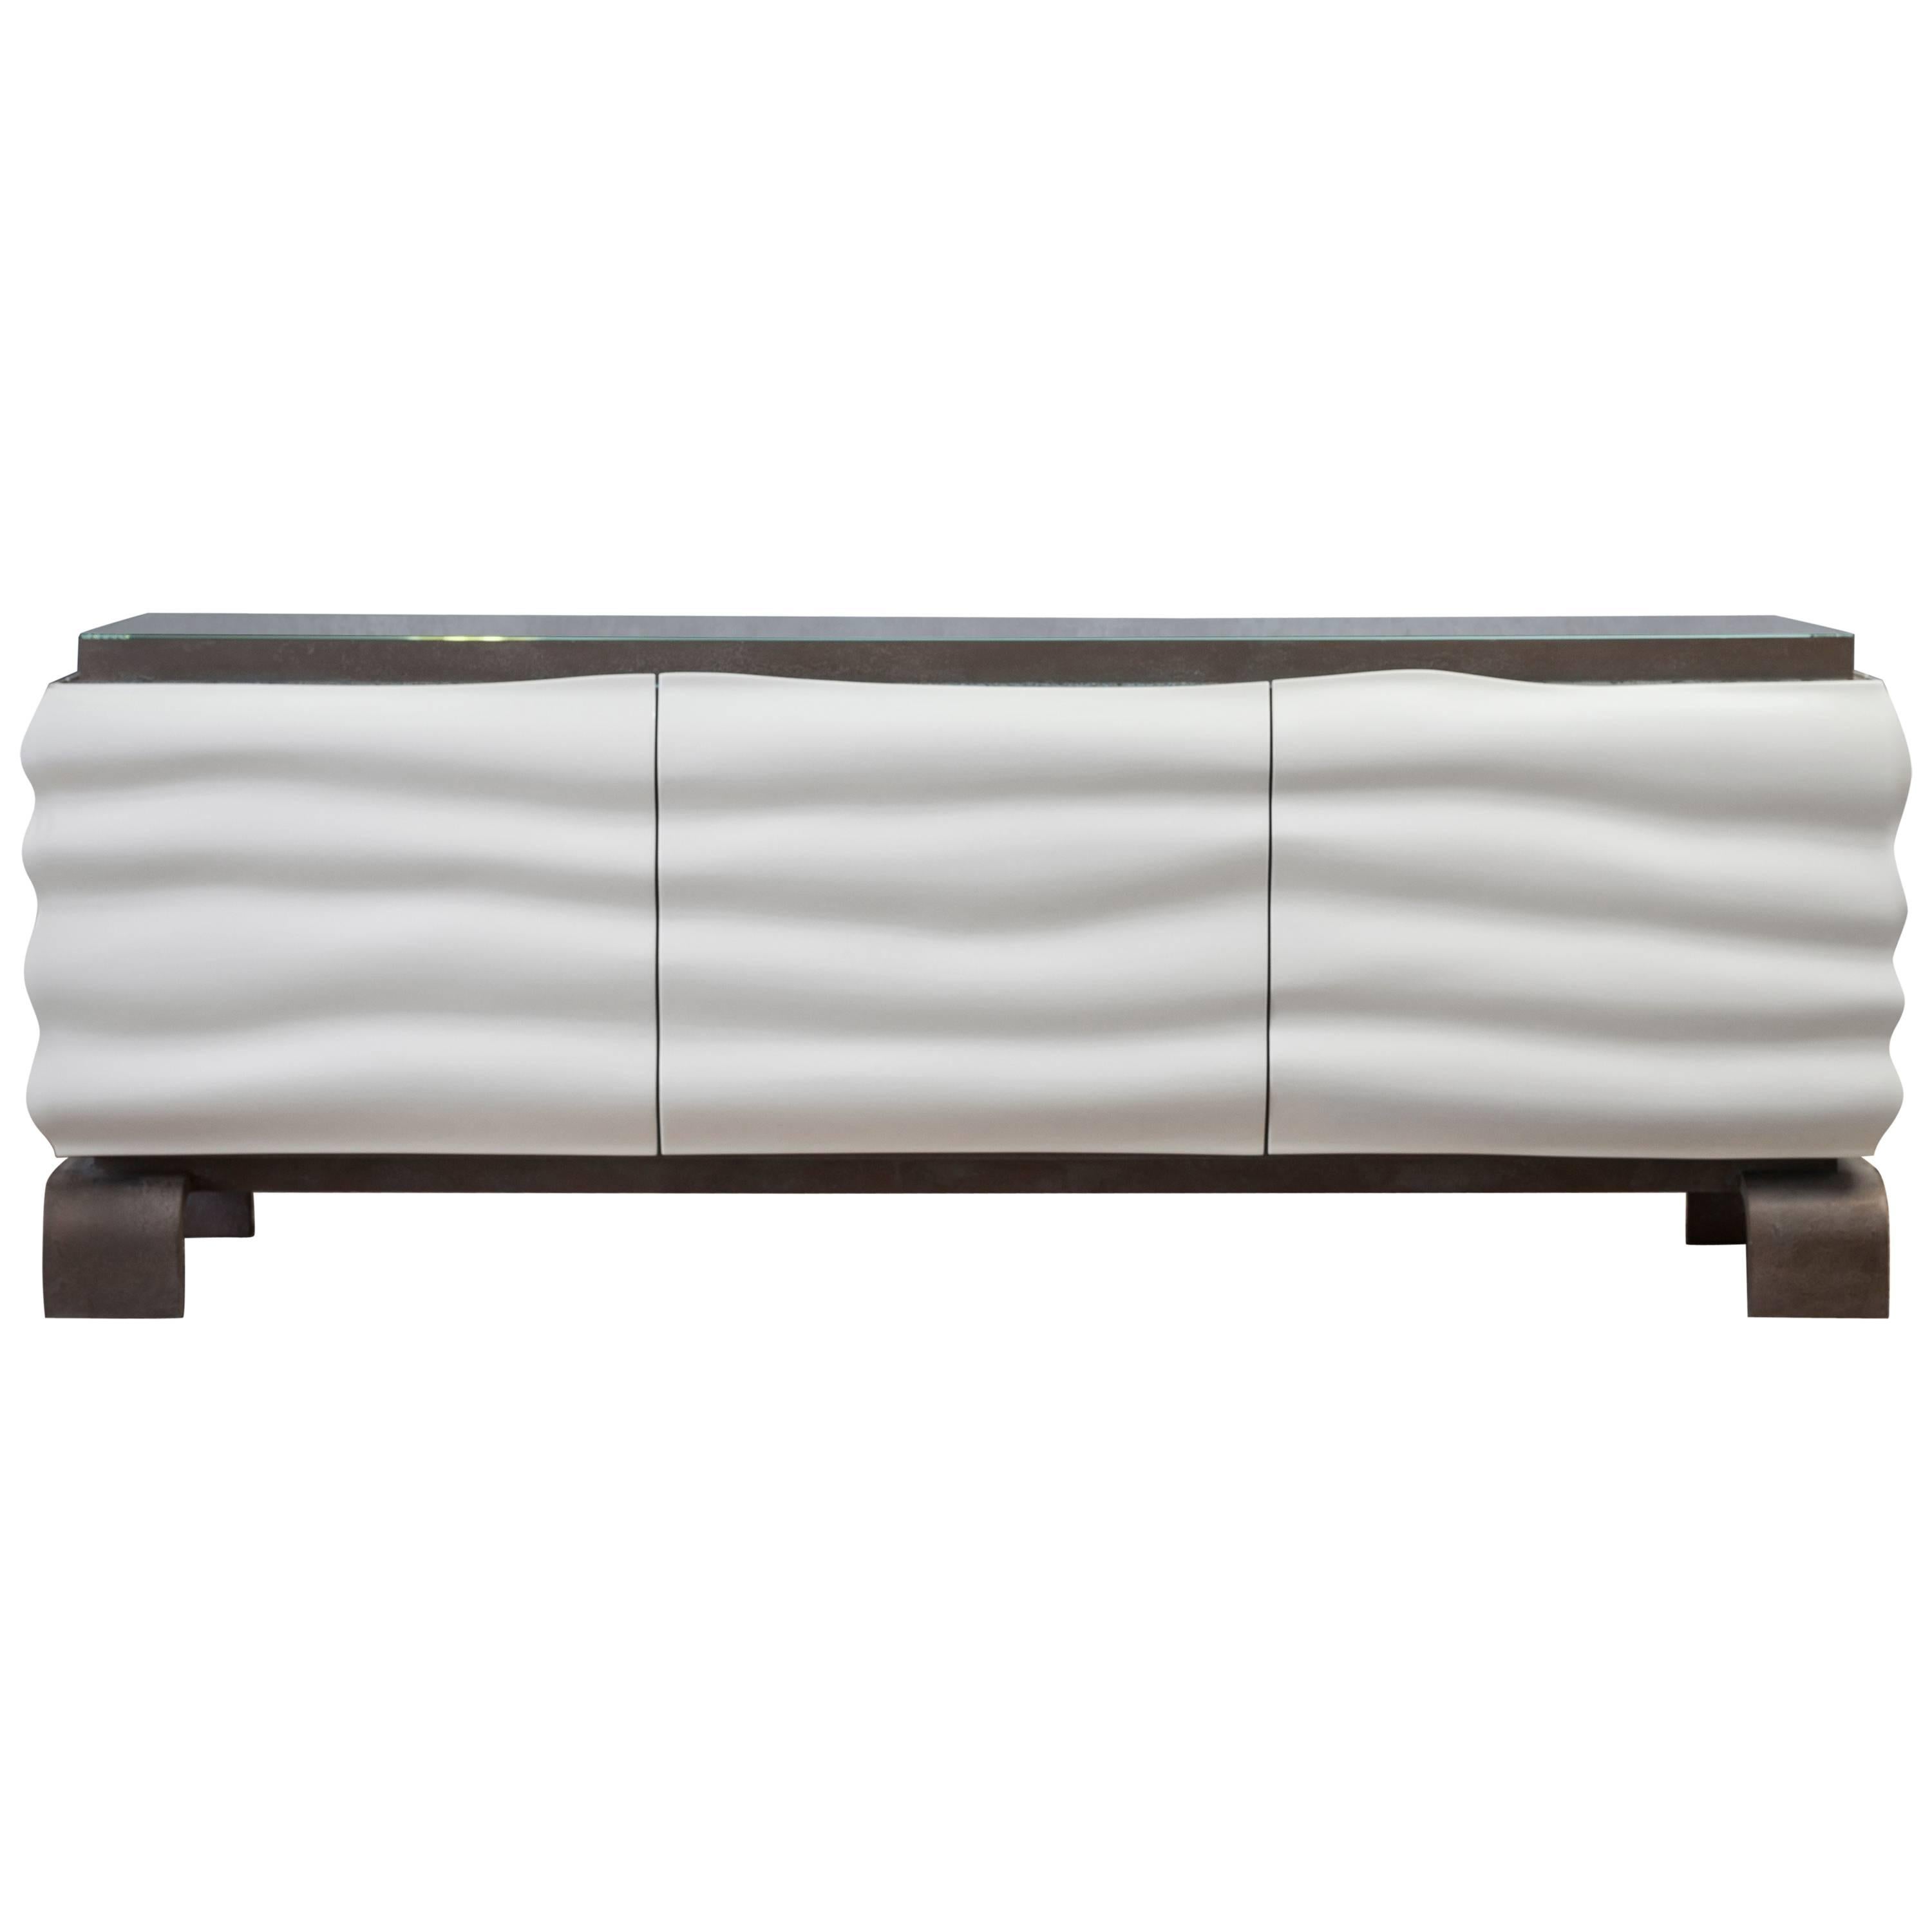 White High Gloss Lacquered Sideboard or Credenza With Mitred Low Iron Glass For Sale